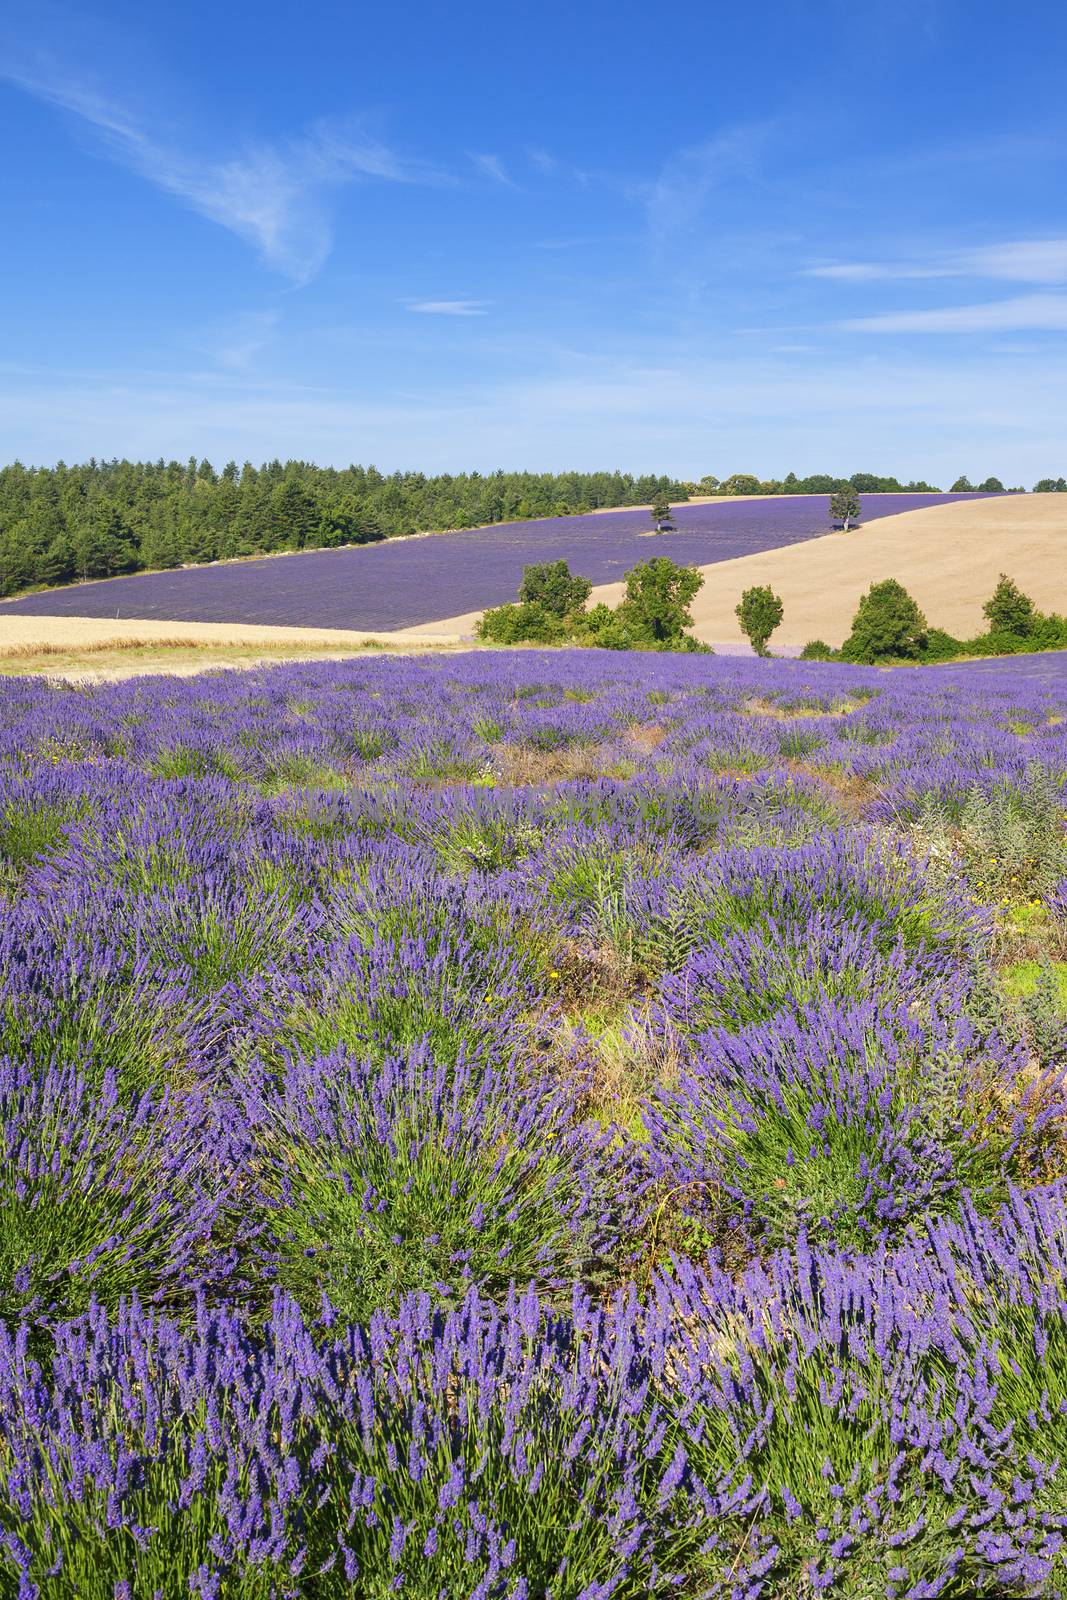 Vertical view of lavender and wheat field with tree in Provence, France